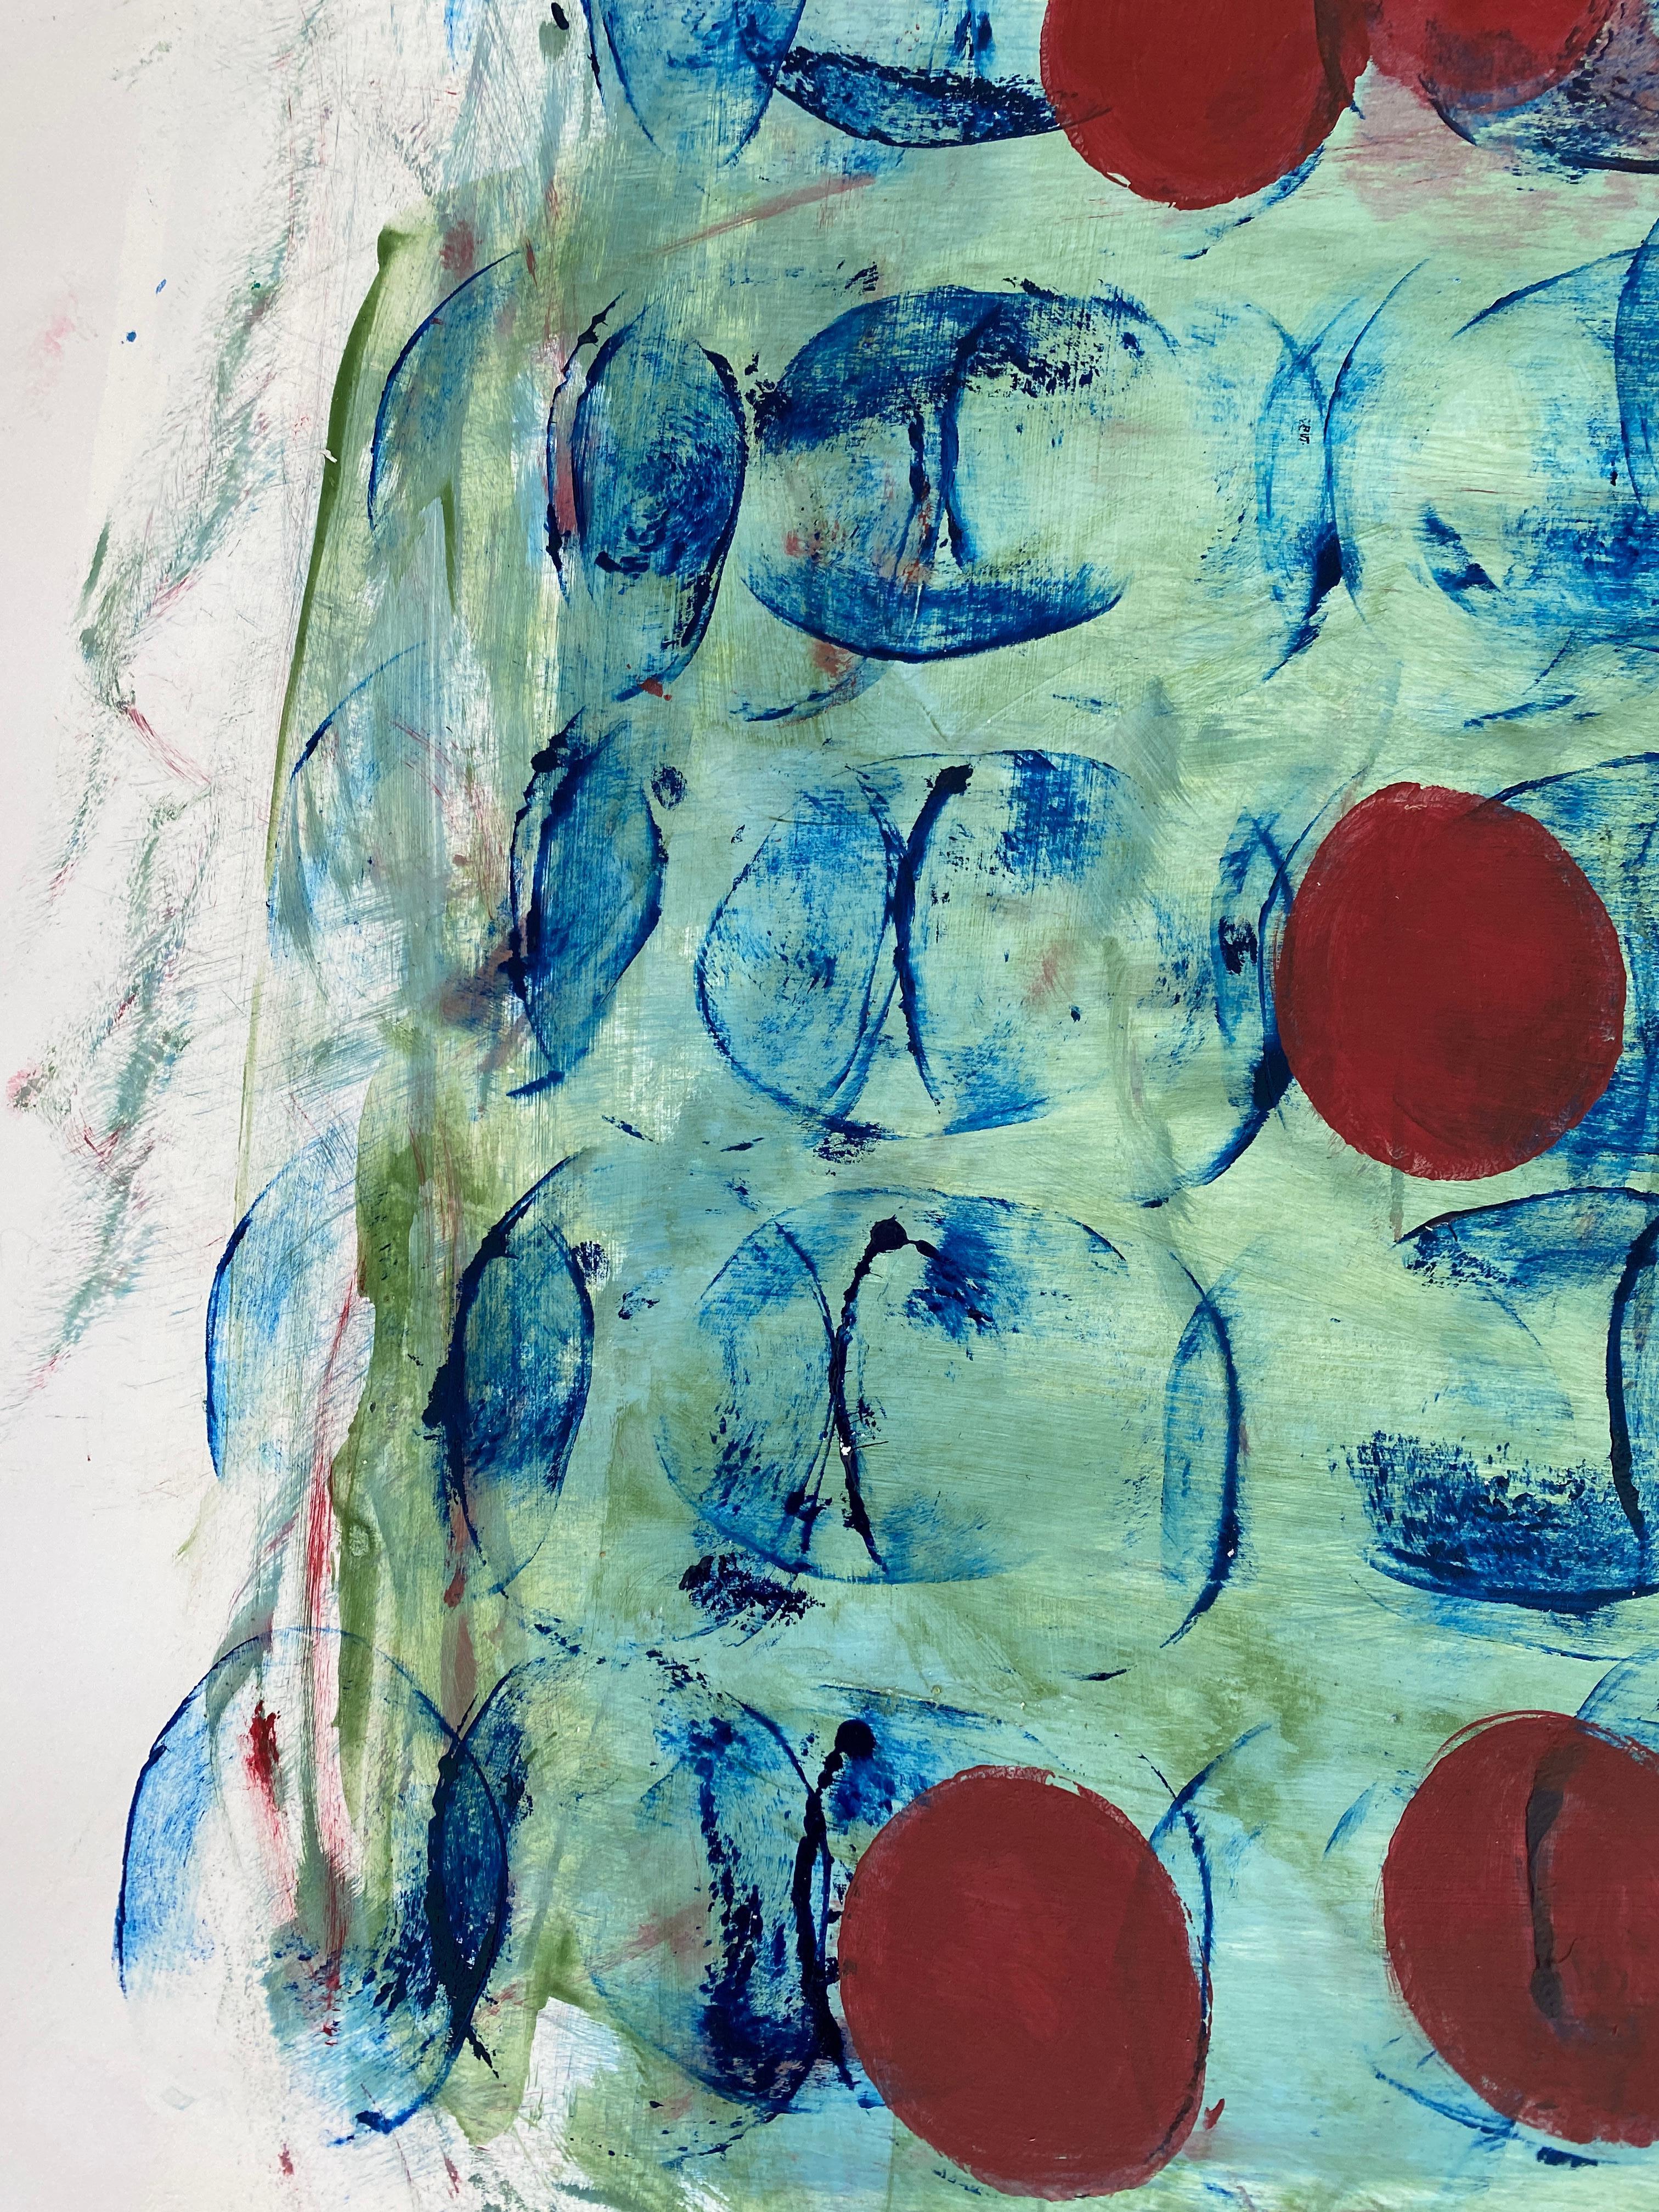 Underwater: Red Circles Against Blue Background  - Painting by Lisa Lightman